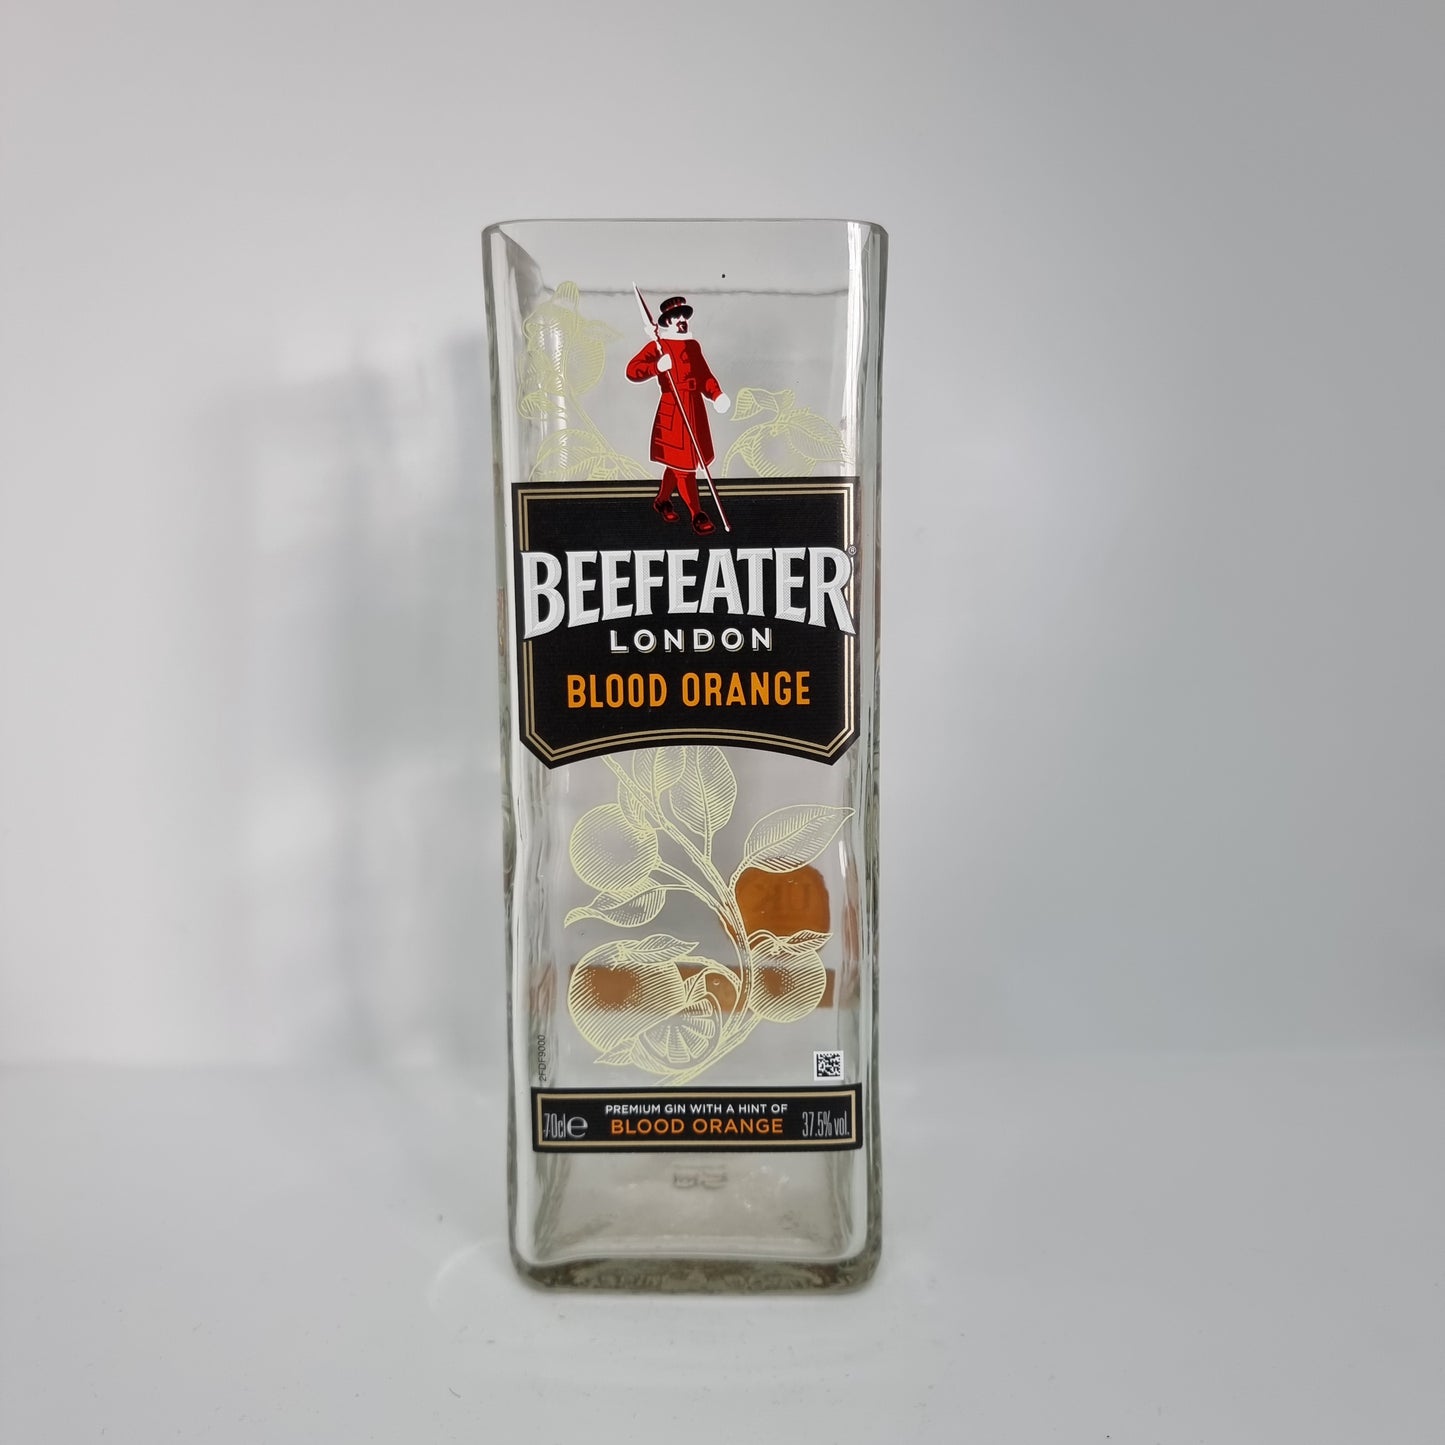 Beefeater London Blood Orange Gin Bottle Candle